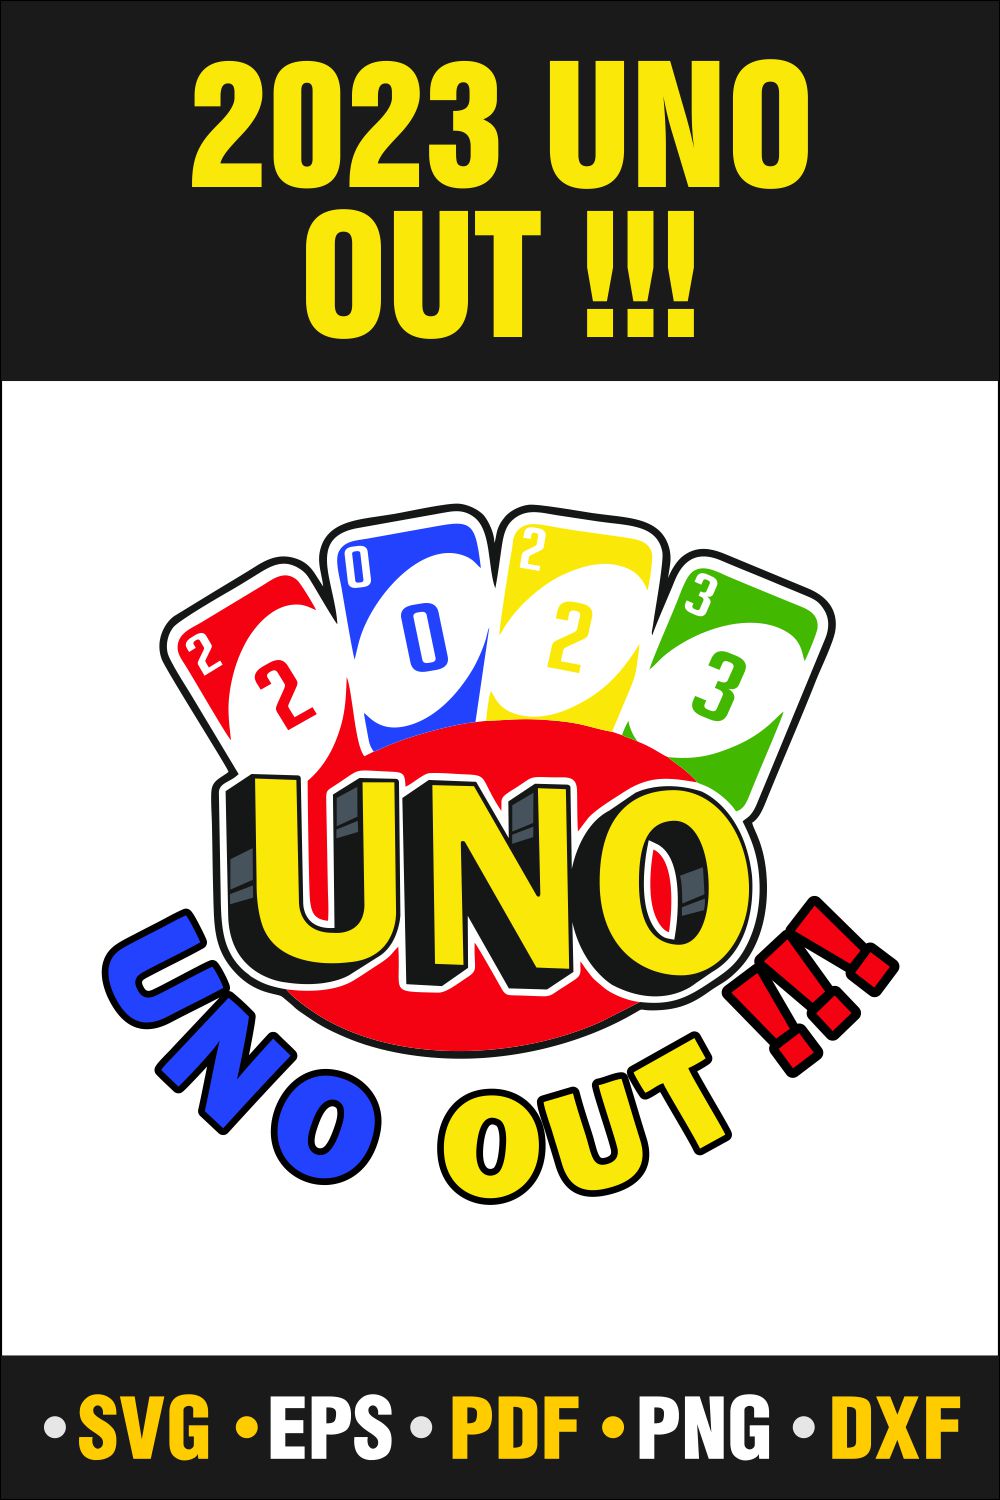 2023 Uno Out Svg, 2023 Uno Out, Vector Cut file Cricut, Silhouette, Uno Sublimation, 2023 Uno Out Png pinterest preview image.